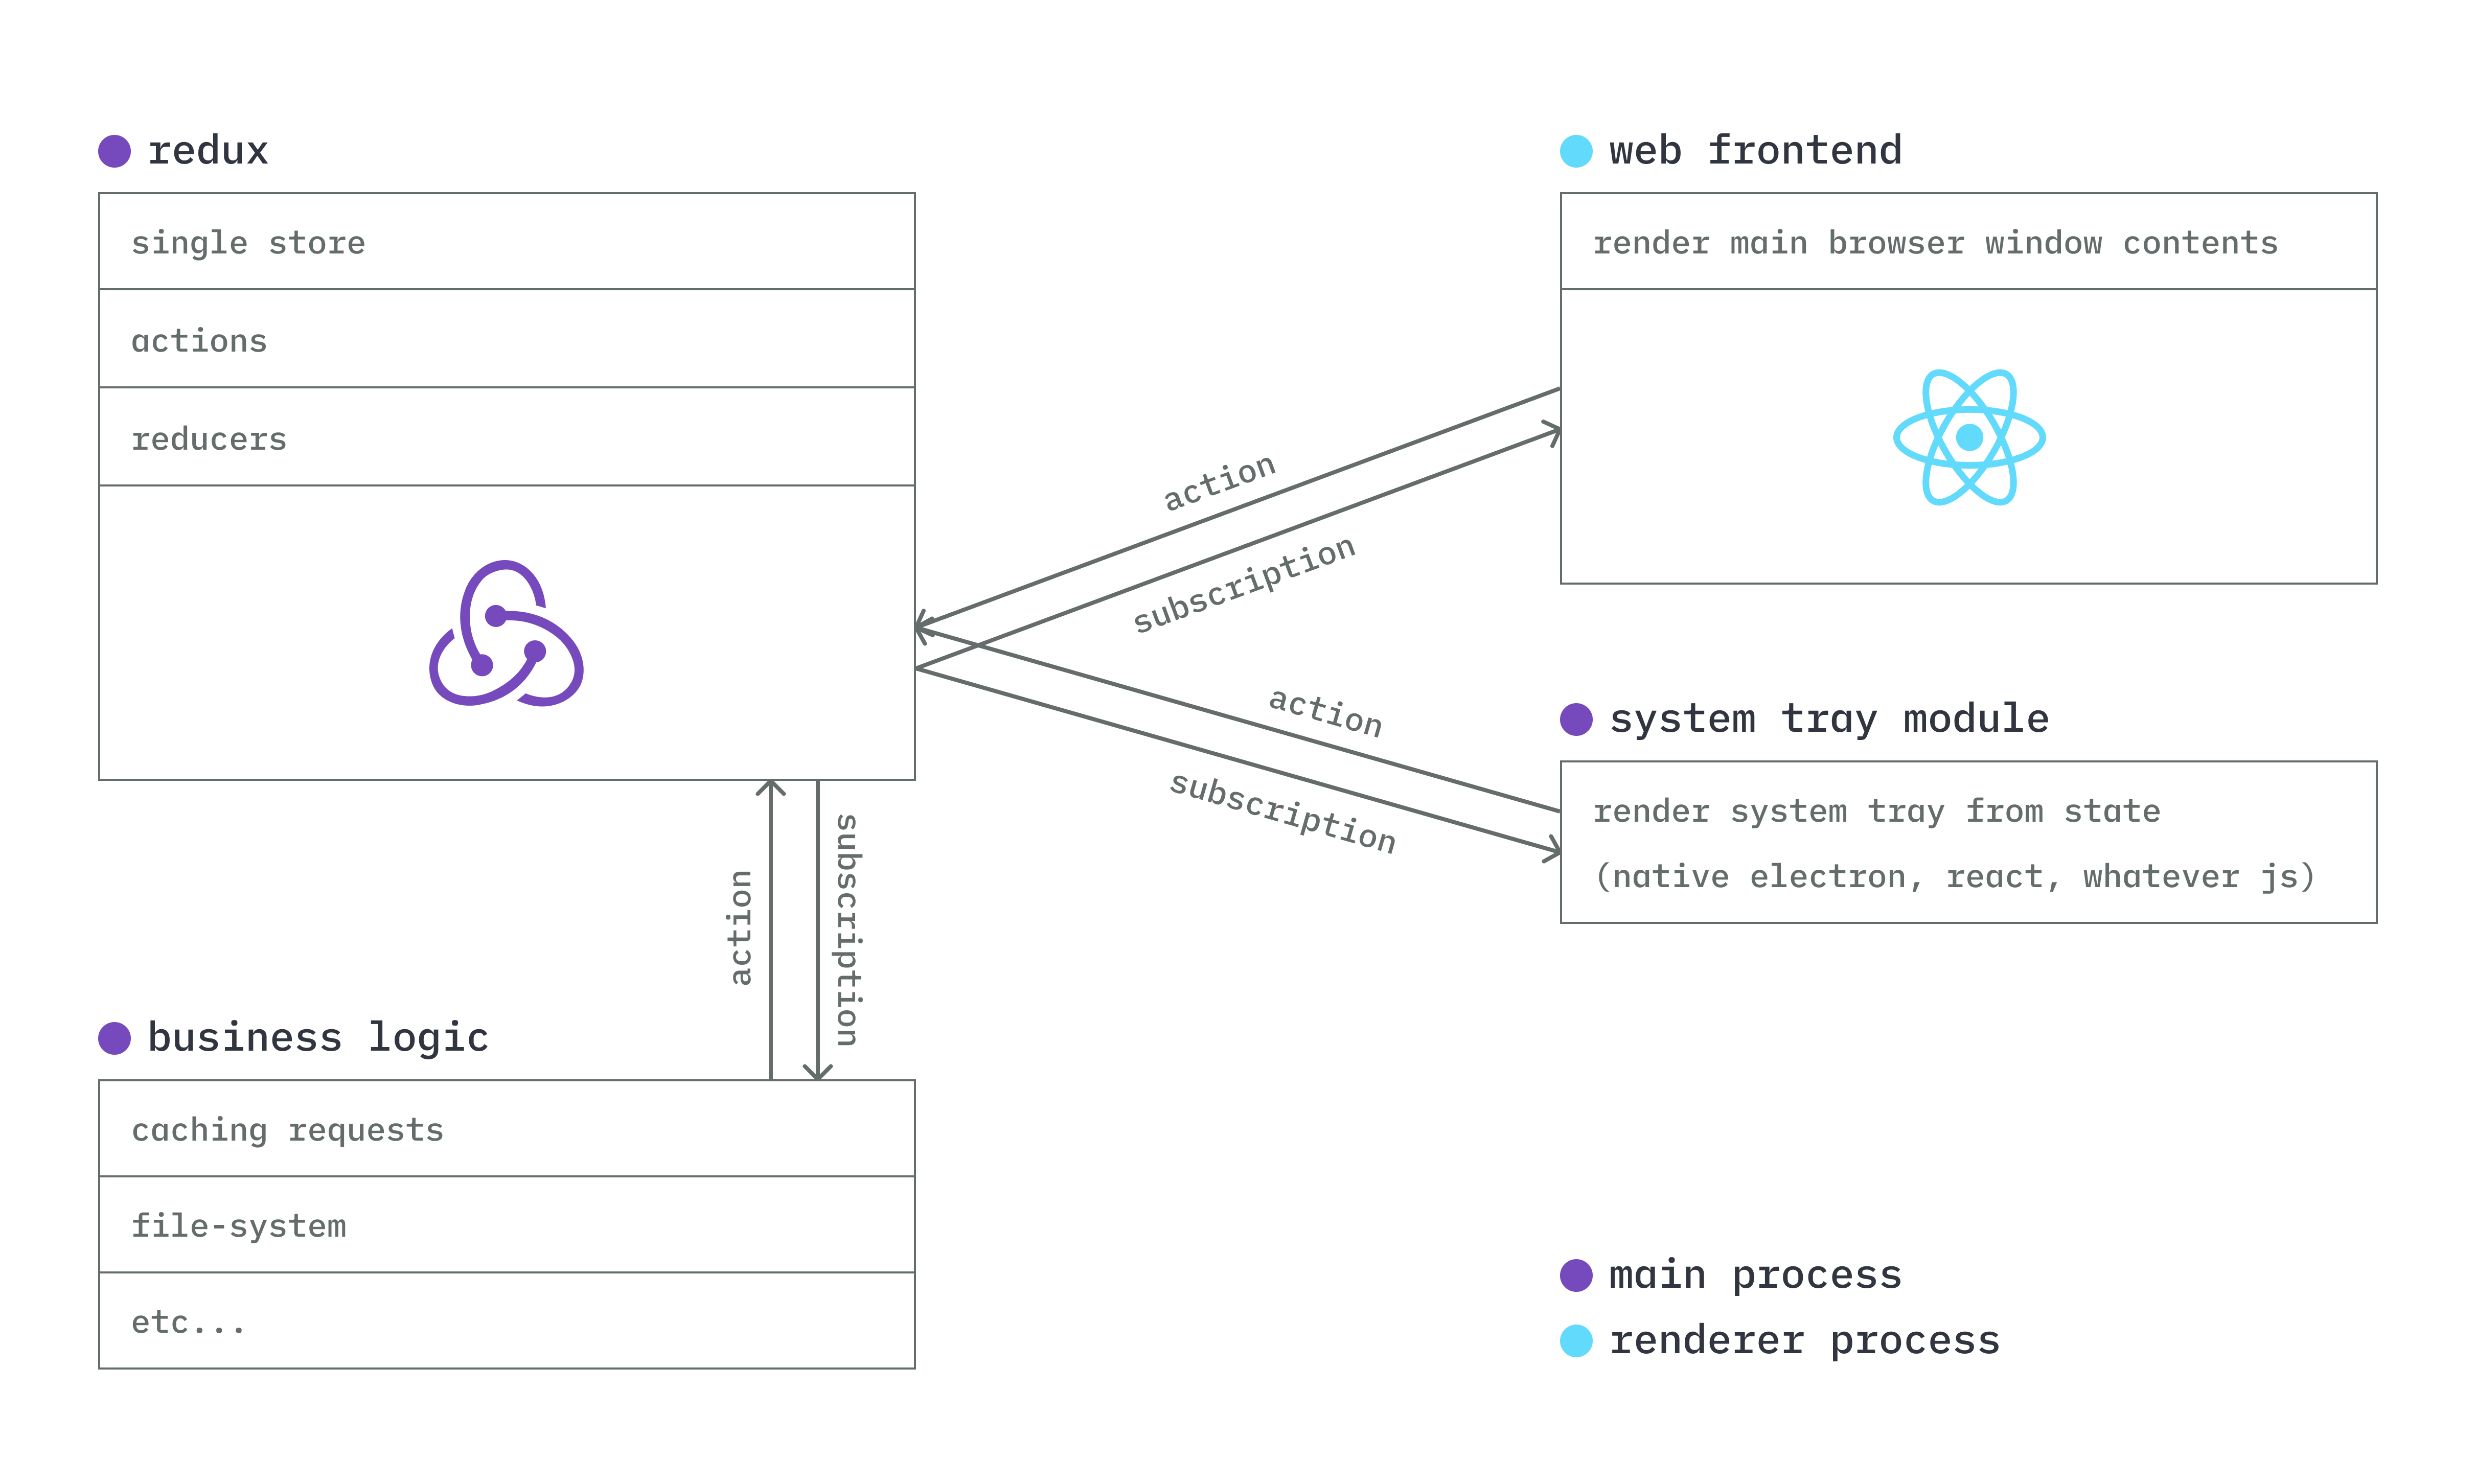 reduxtron setup: with redux, business logic and node/electron api running on the main process and the web frontend on the renderer. all pieces connect to the redux piece using actions and subscriptions